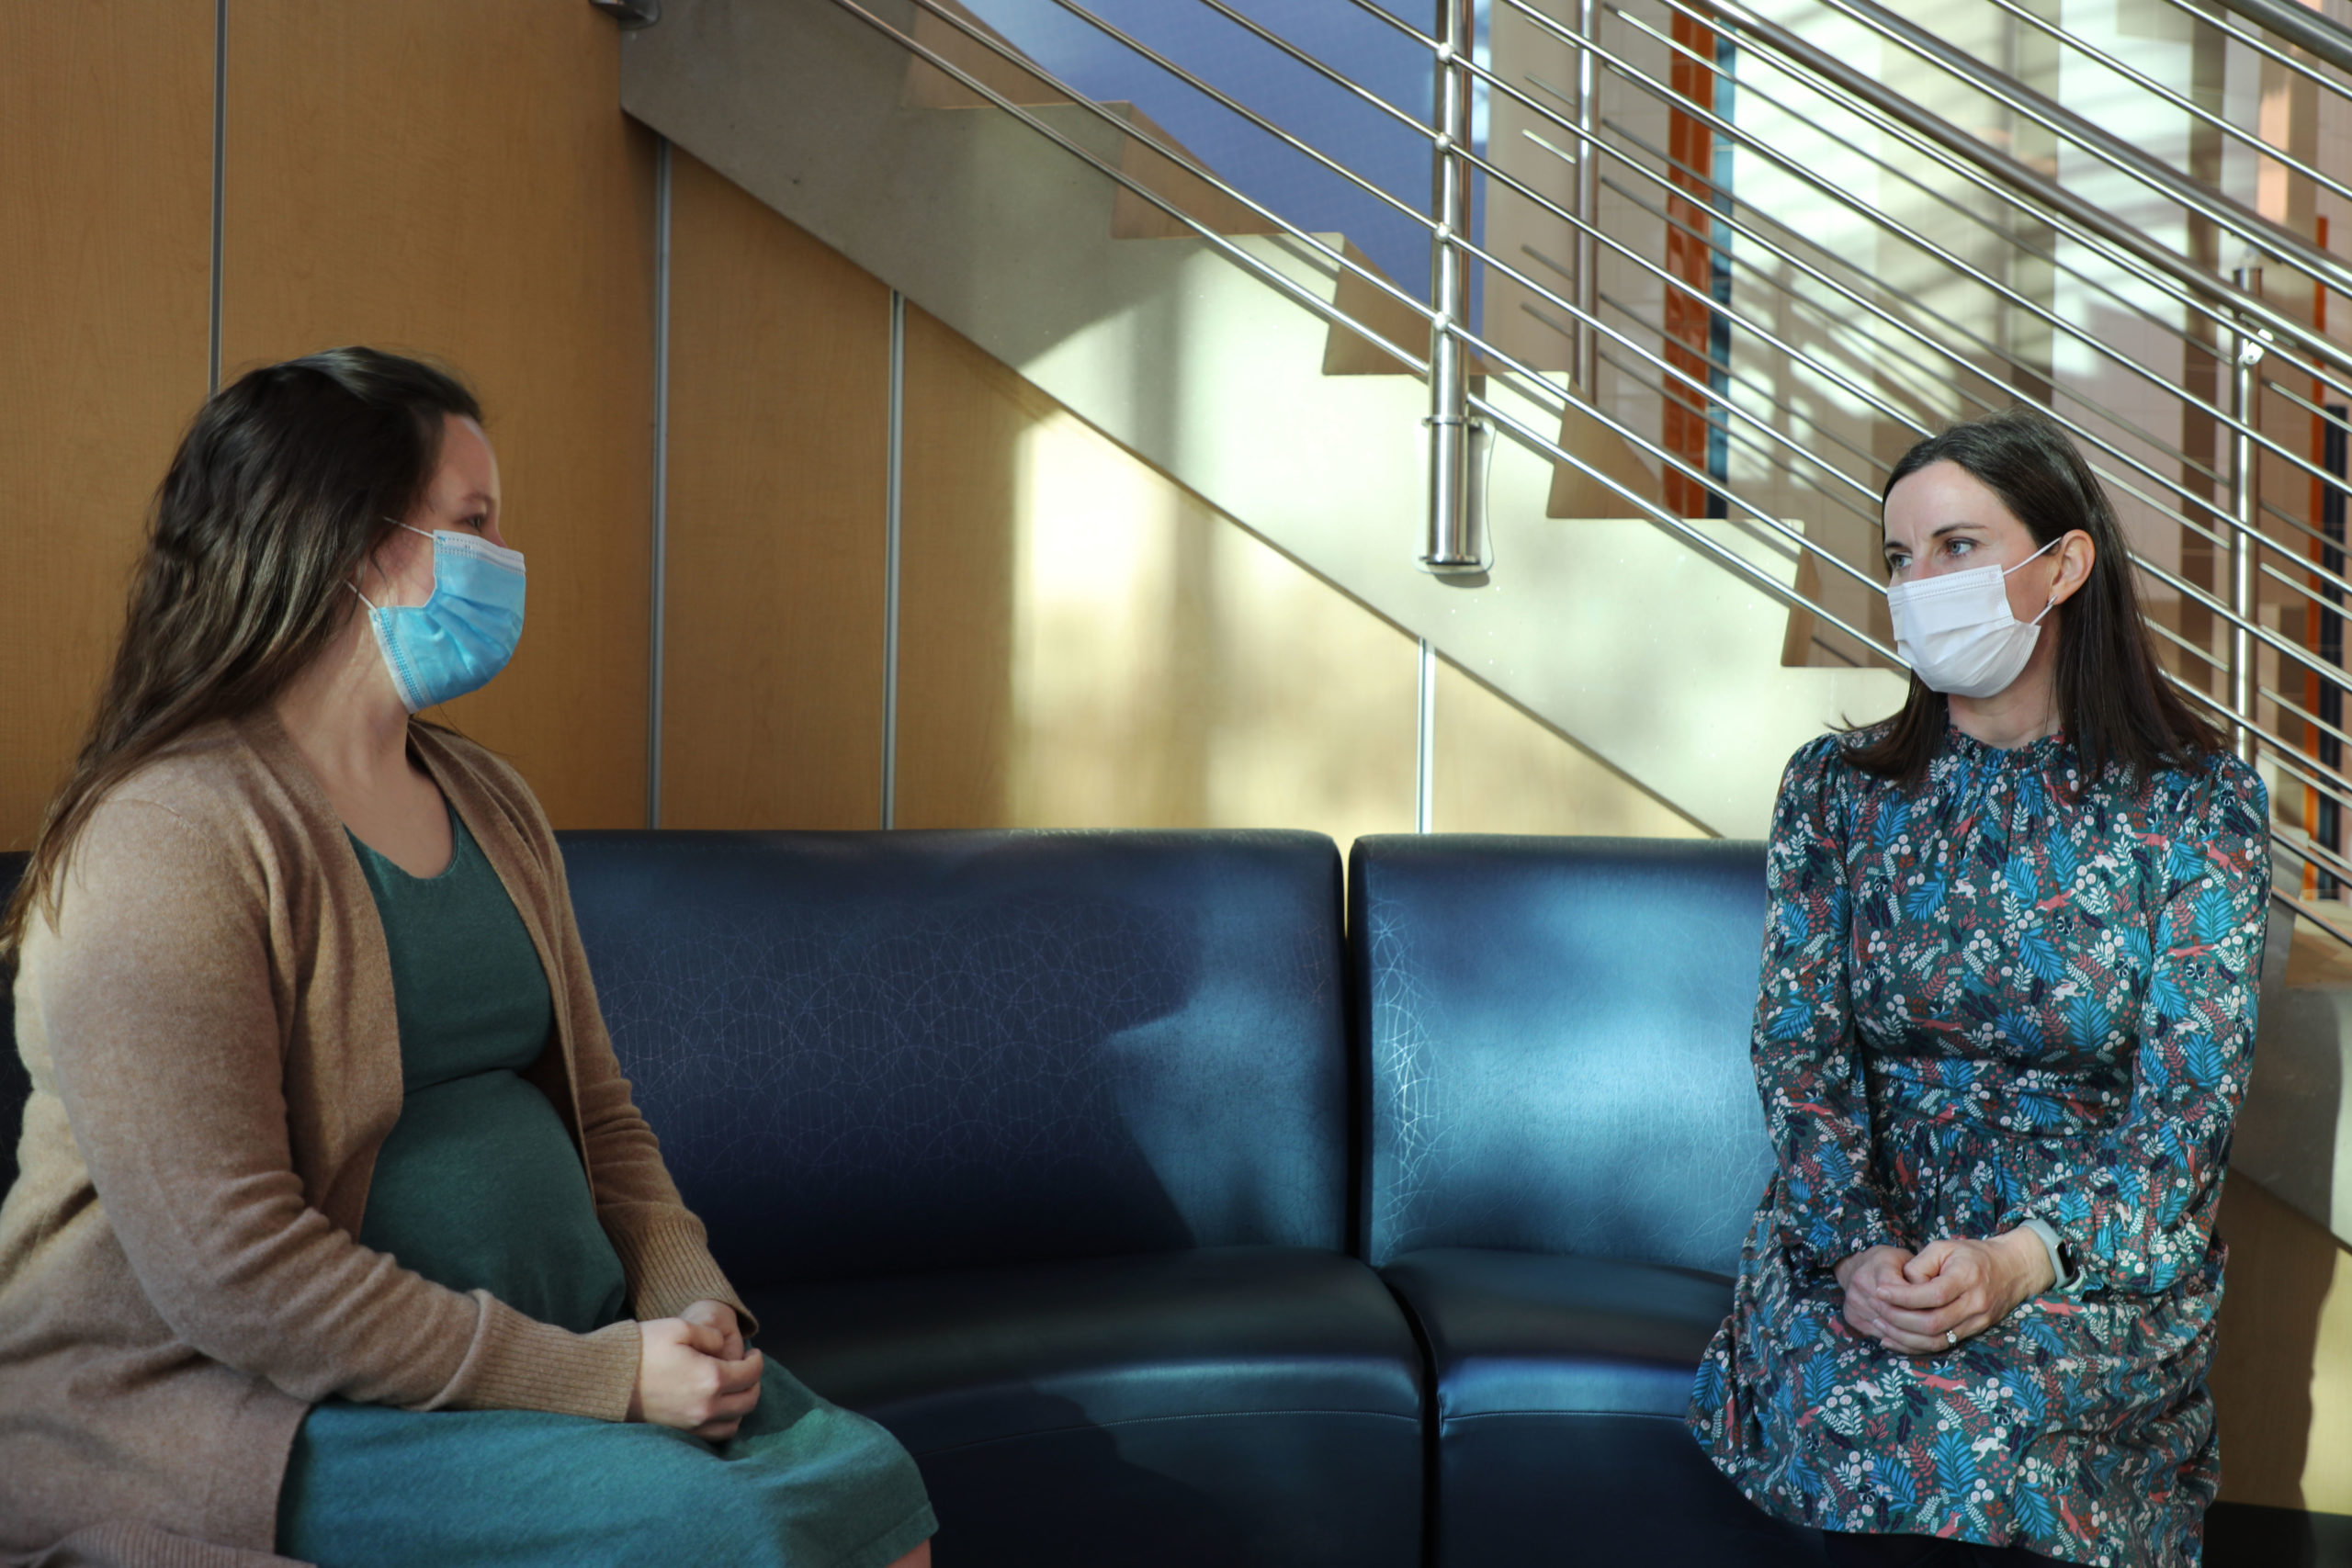 Two women wearing masks seated several feet apart. On the left, Beth, a vaccine trial participant. On the right, Dr. Schlaudecker a researcher at Cincinnati Children's